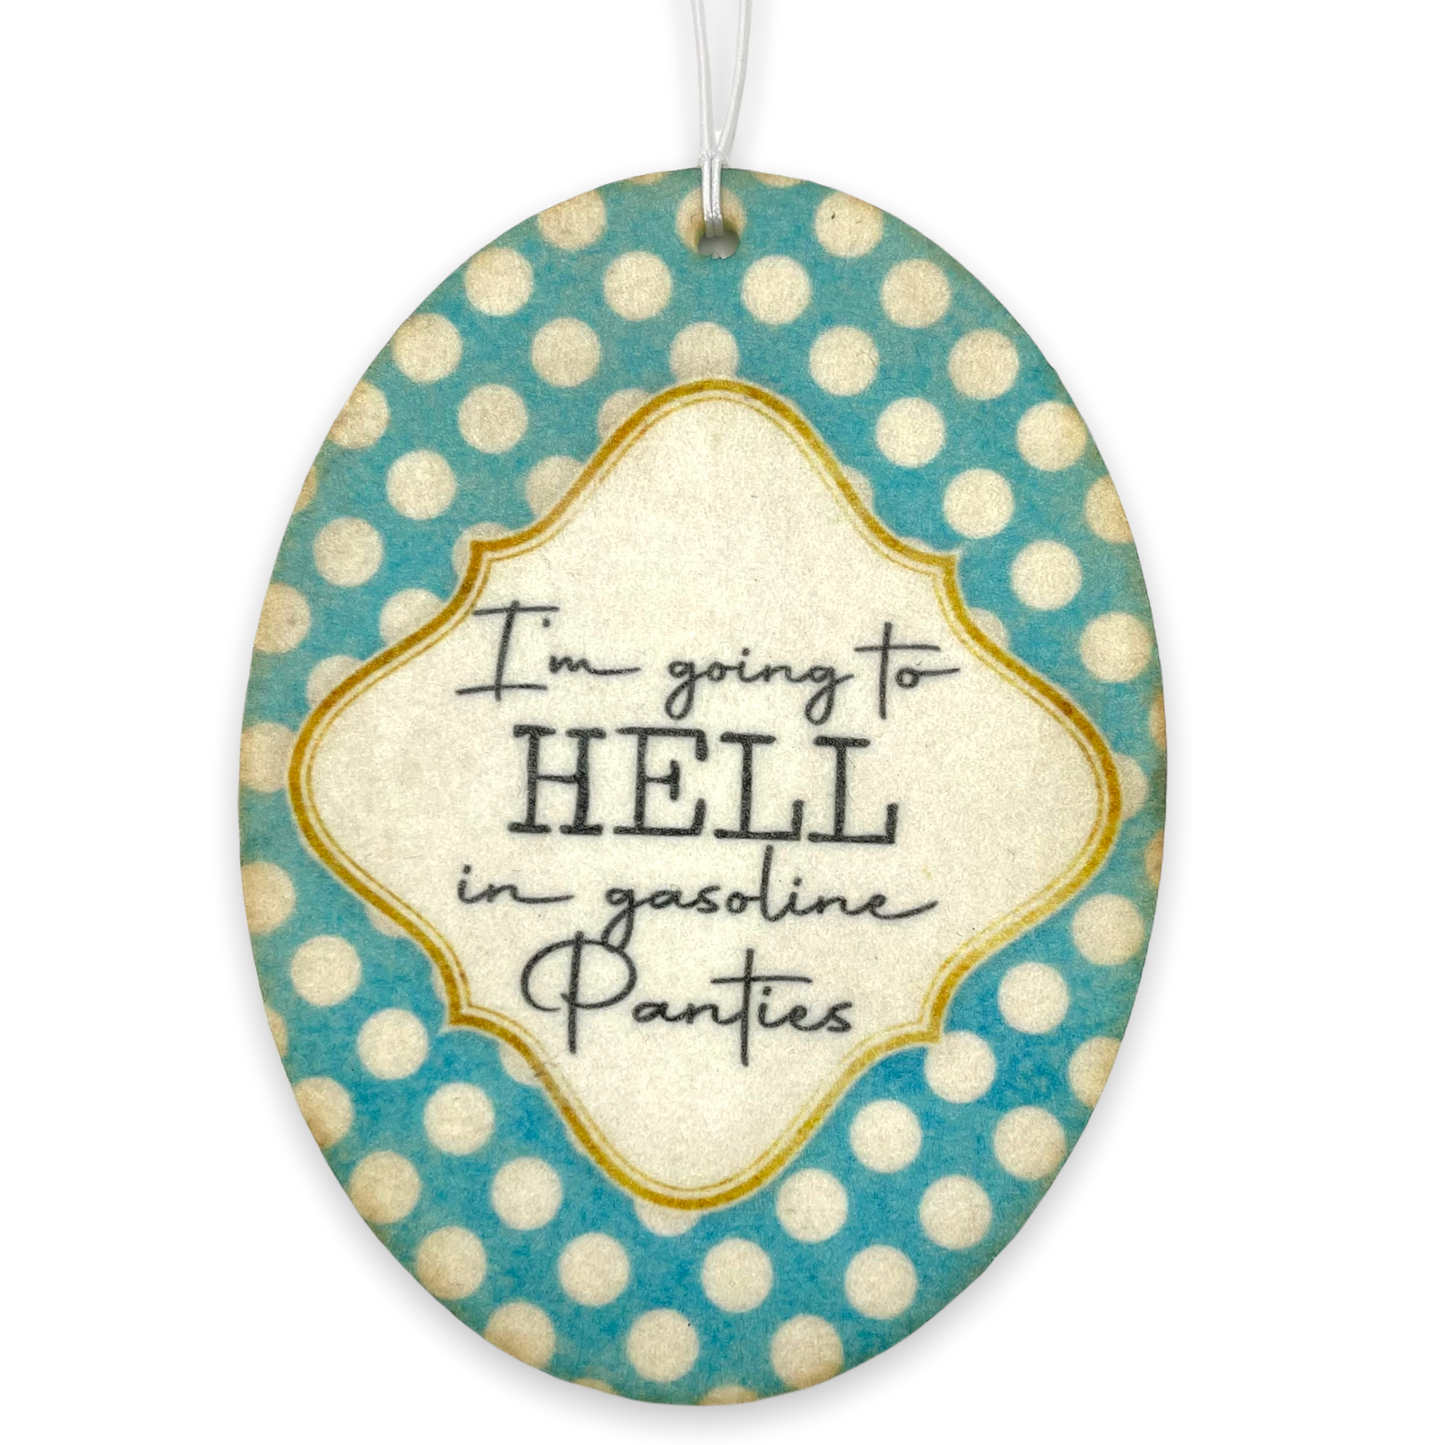 Oval Shaped Air Freshener Sublimation Blank - Pioneer Supplier & Creations